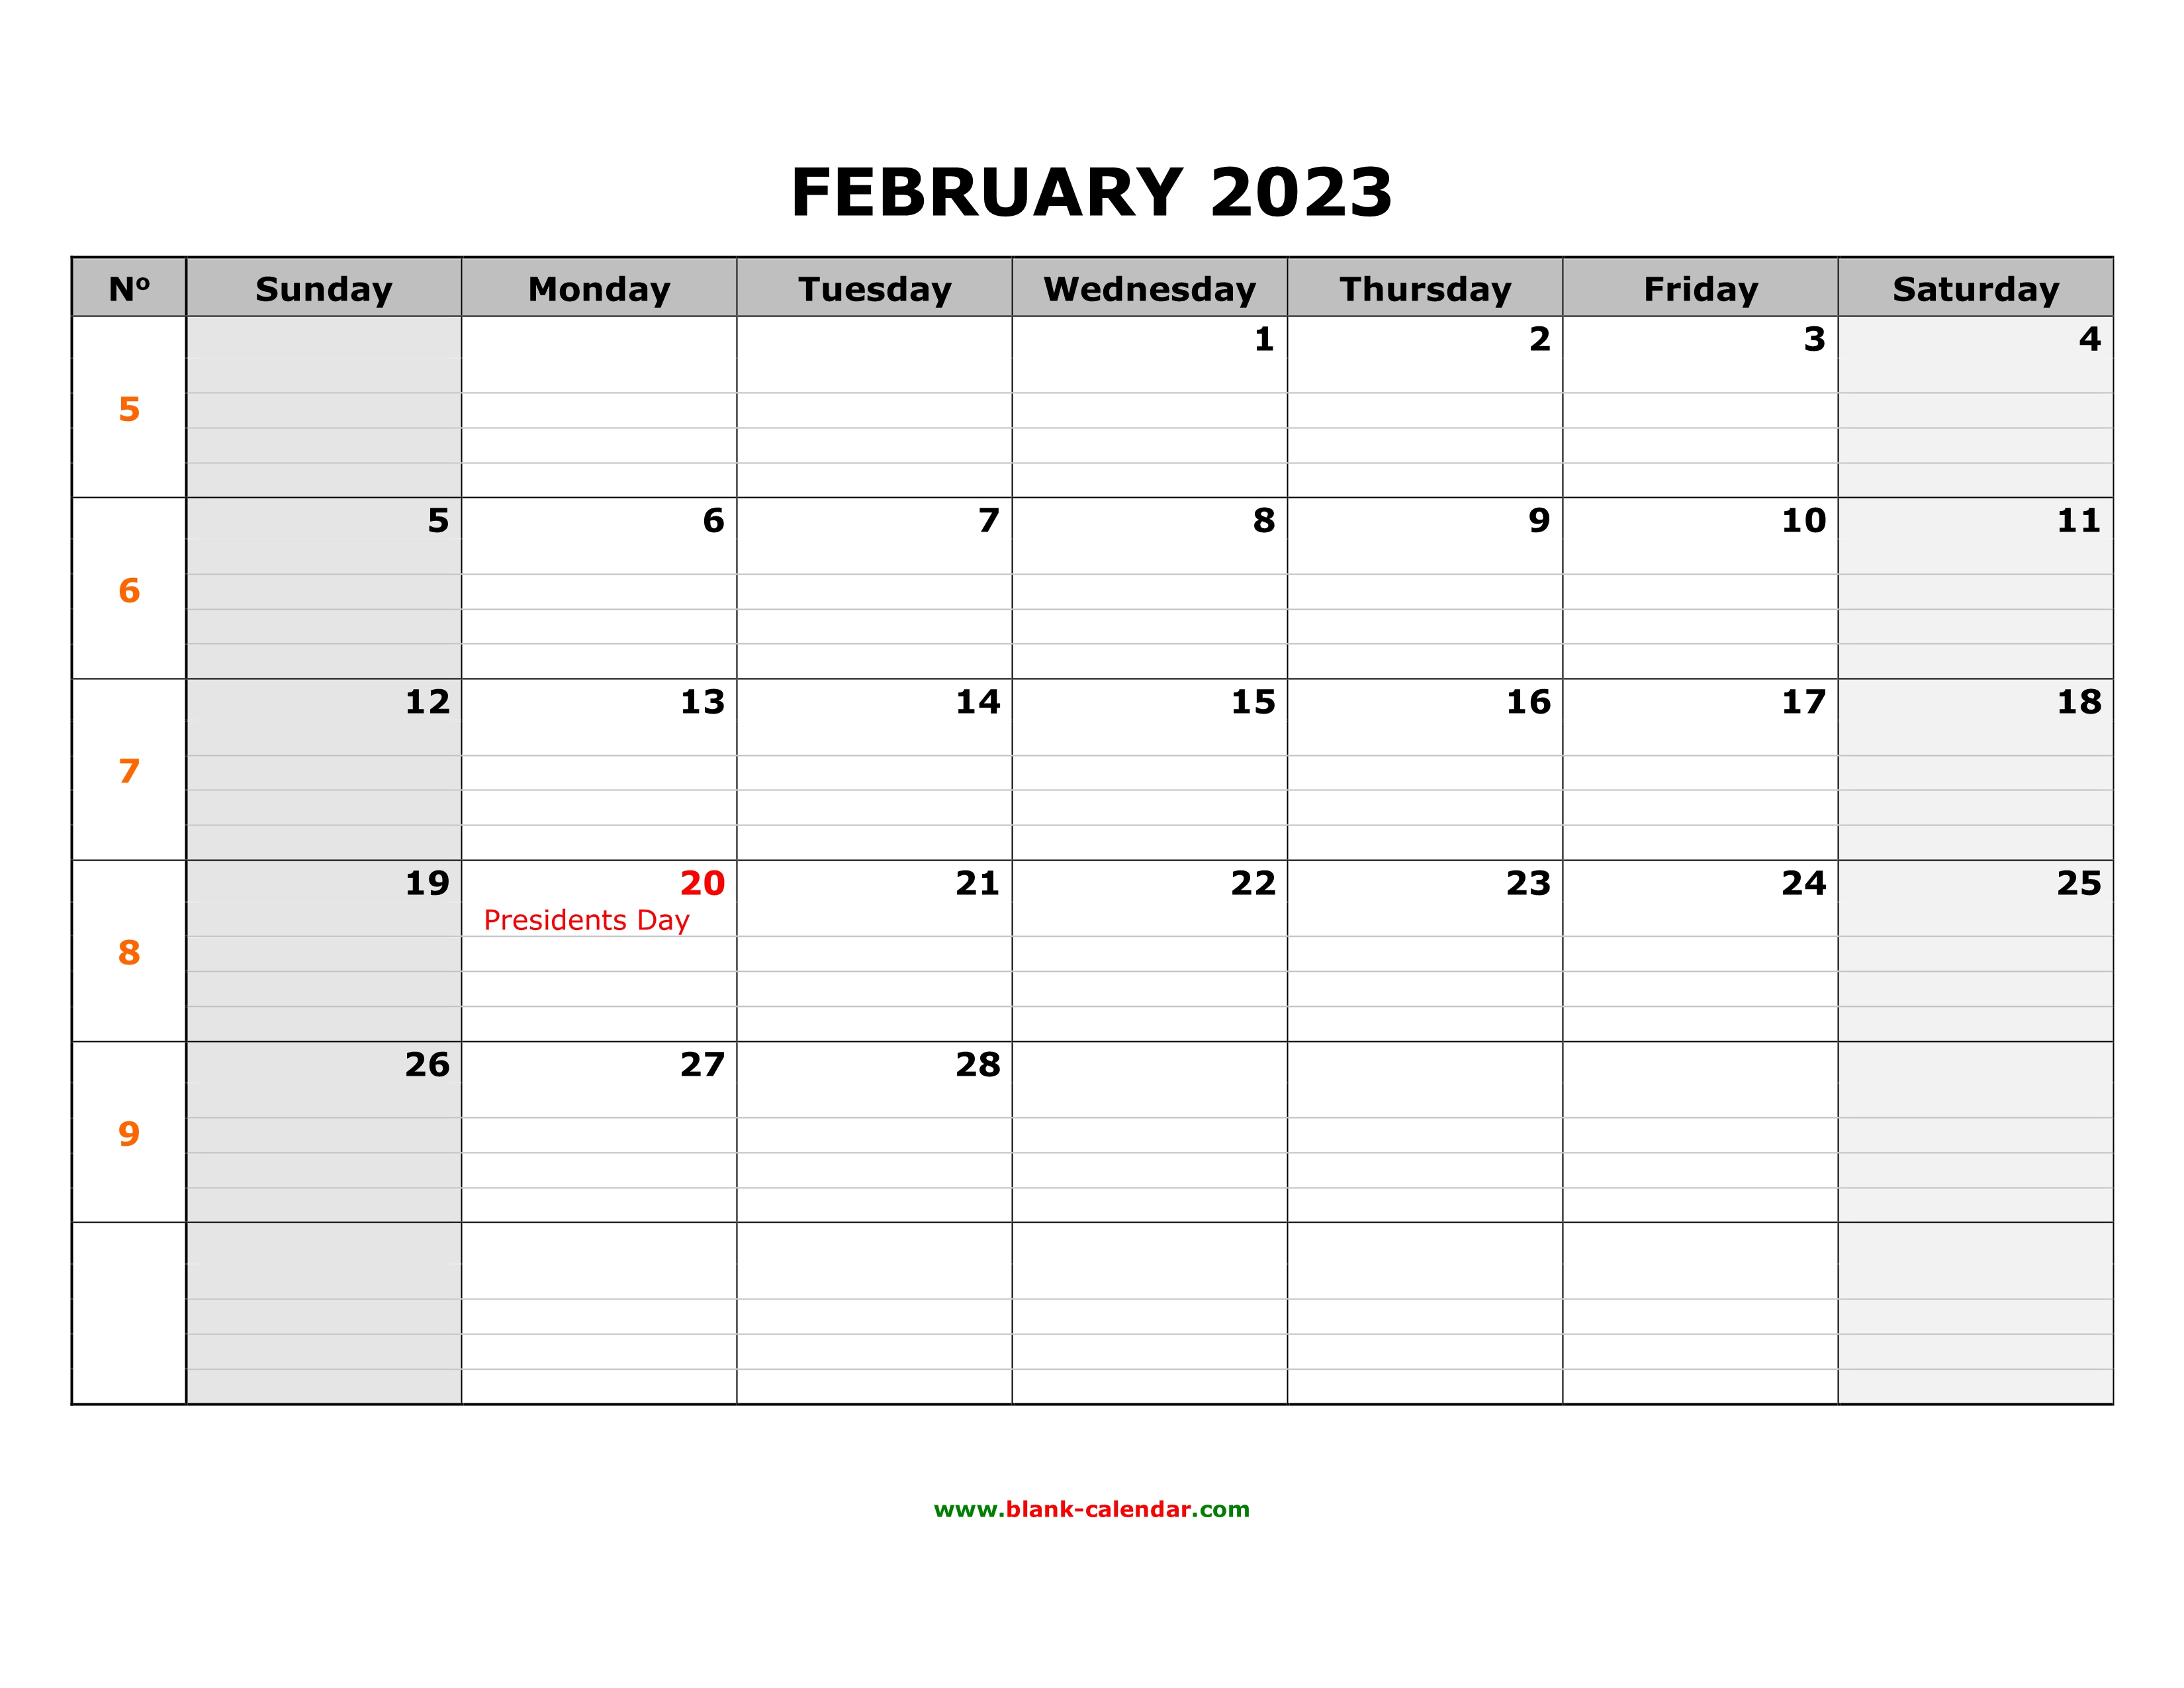 free-printable-february-2023-calendar-get-your-hands-on-amazing-free-printables